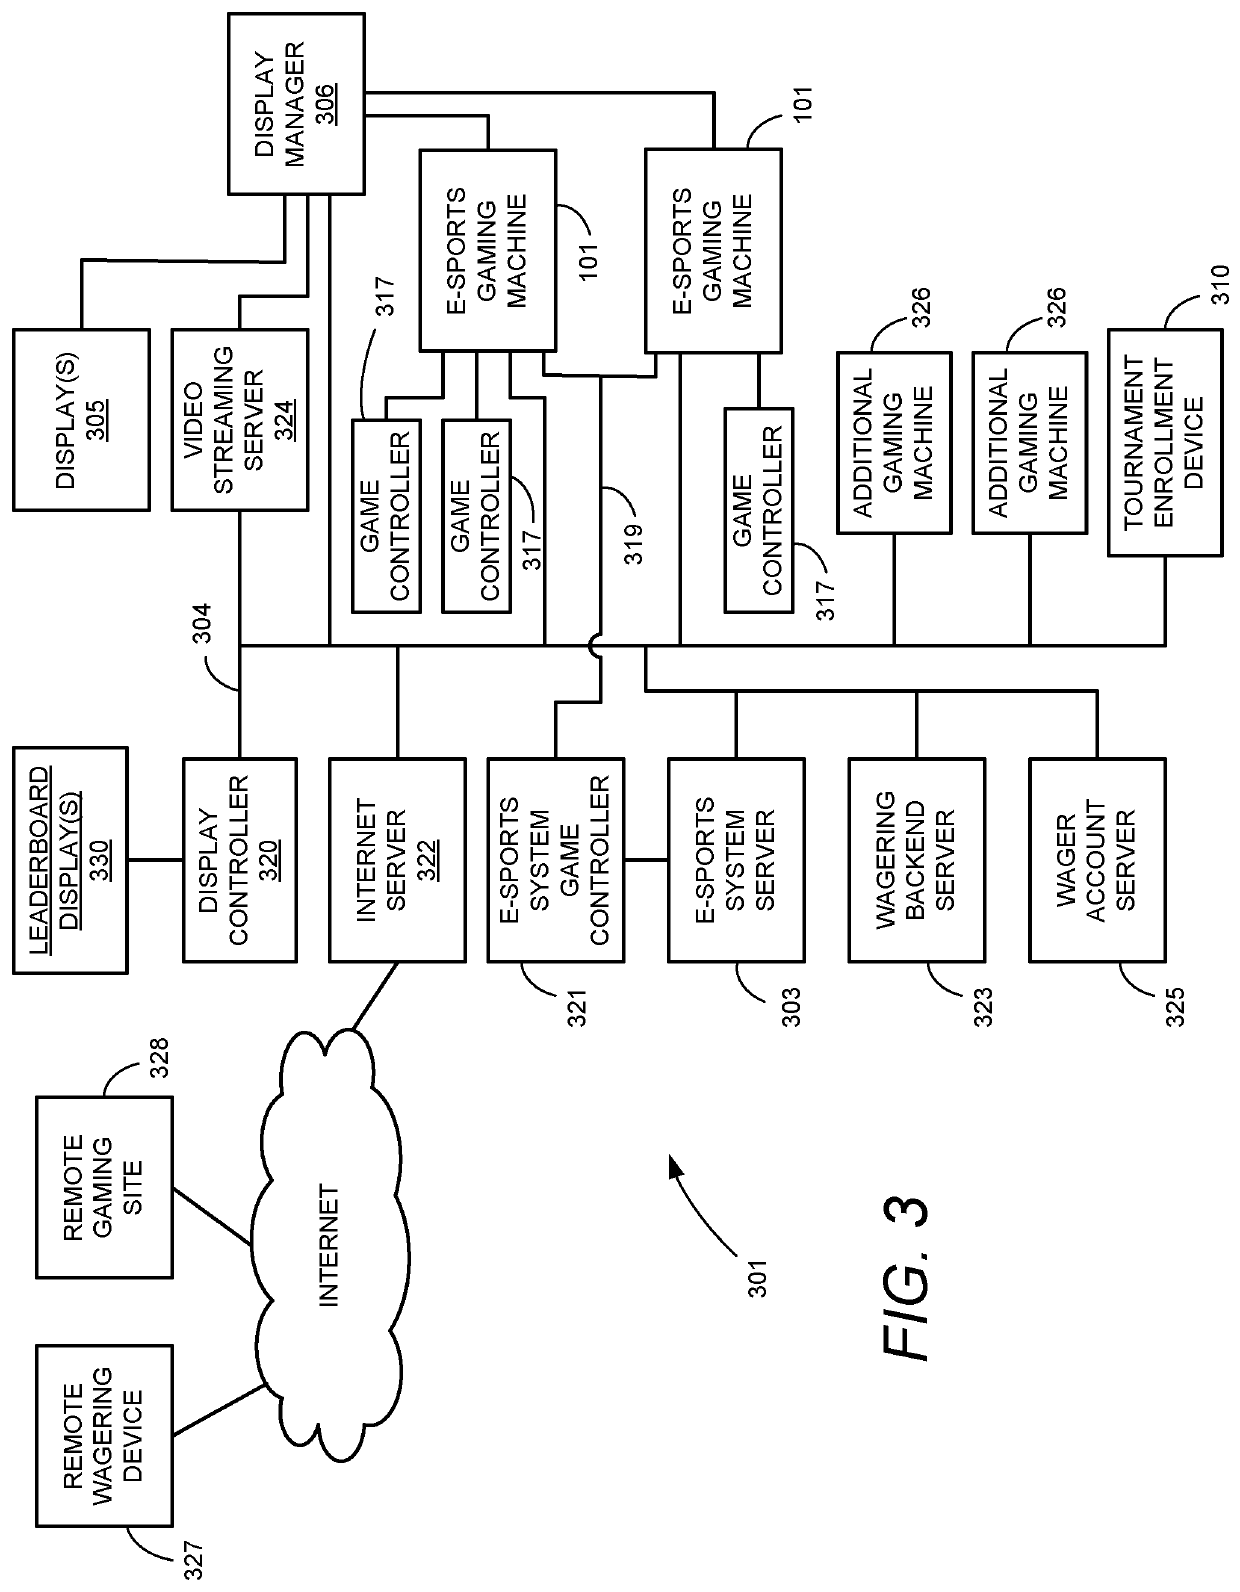 Apparatus and methods for facilitating wagering on games conducted on an independent video gaming system